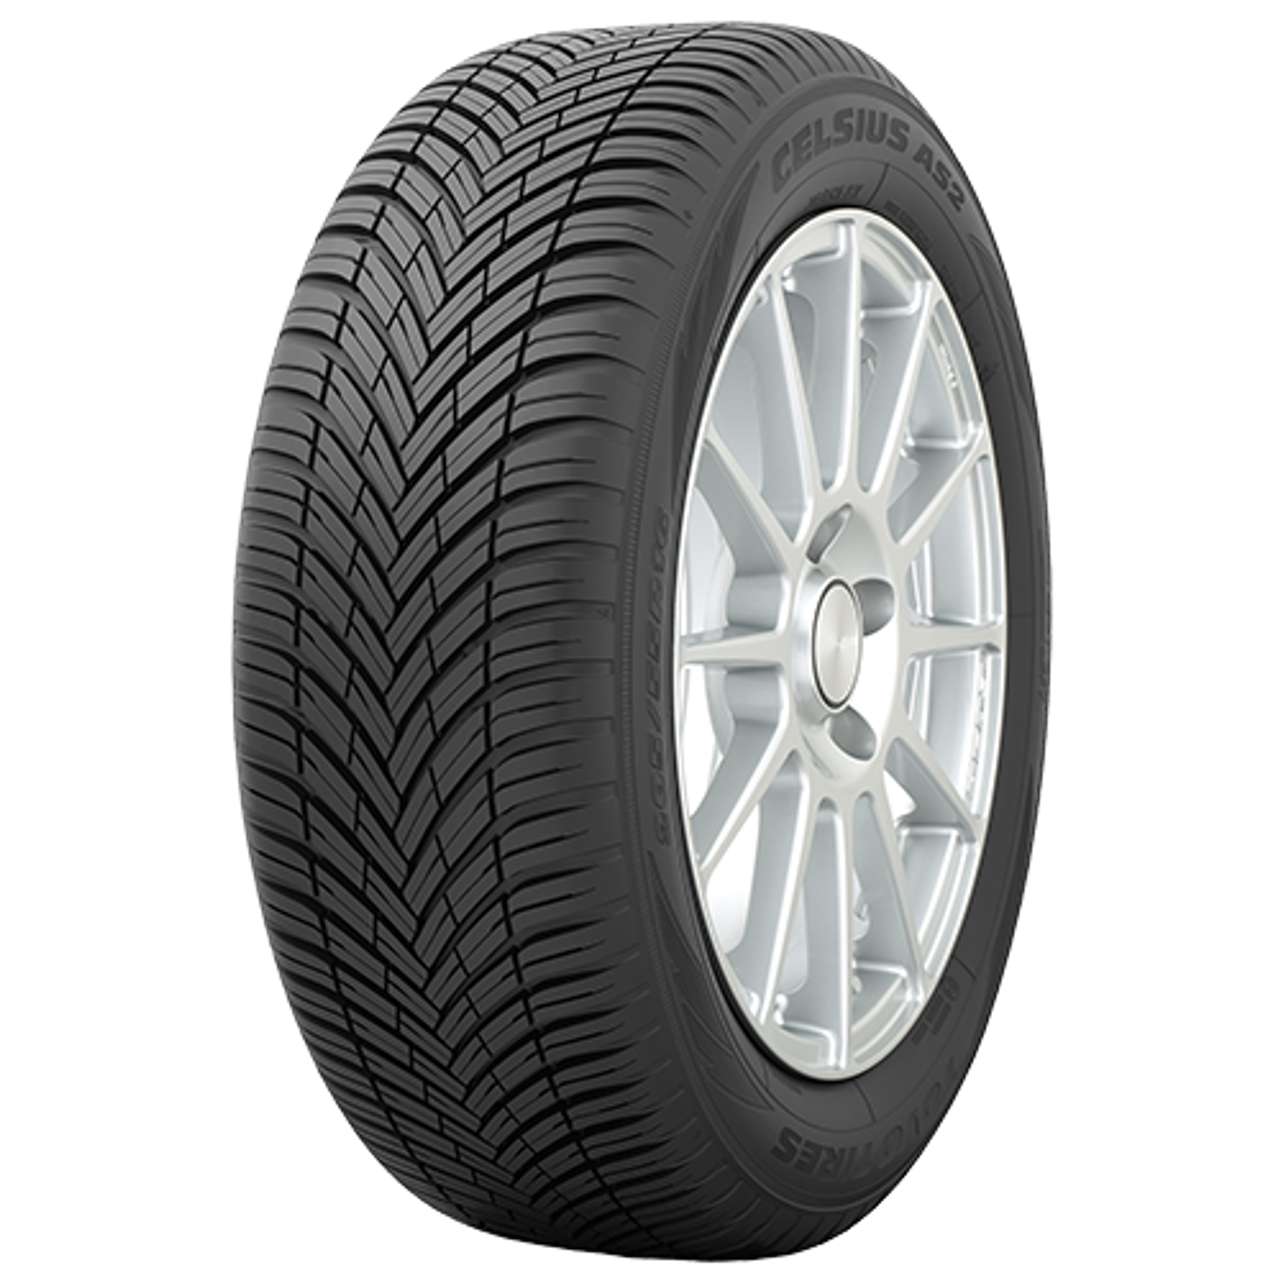 TOYO CELSIUS AS2 255/55R18 109W BSW